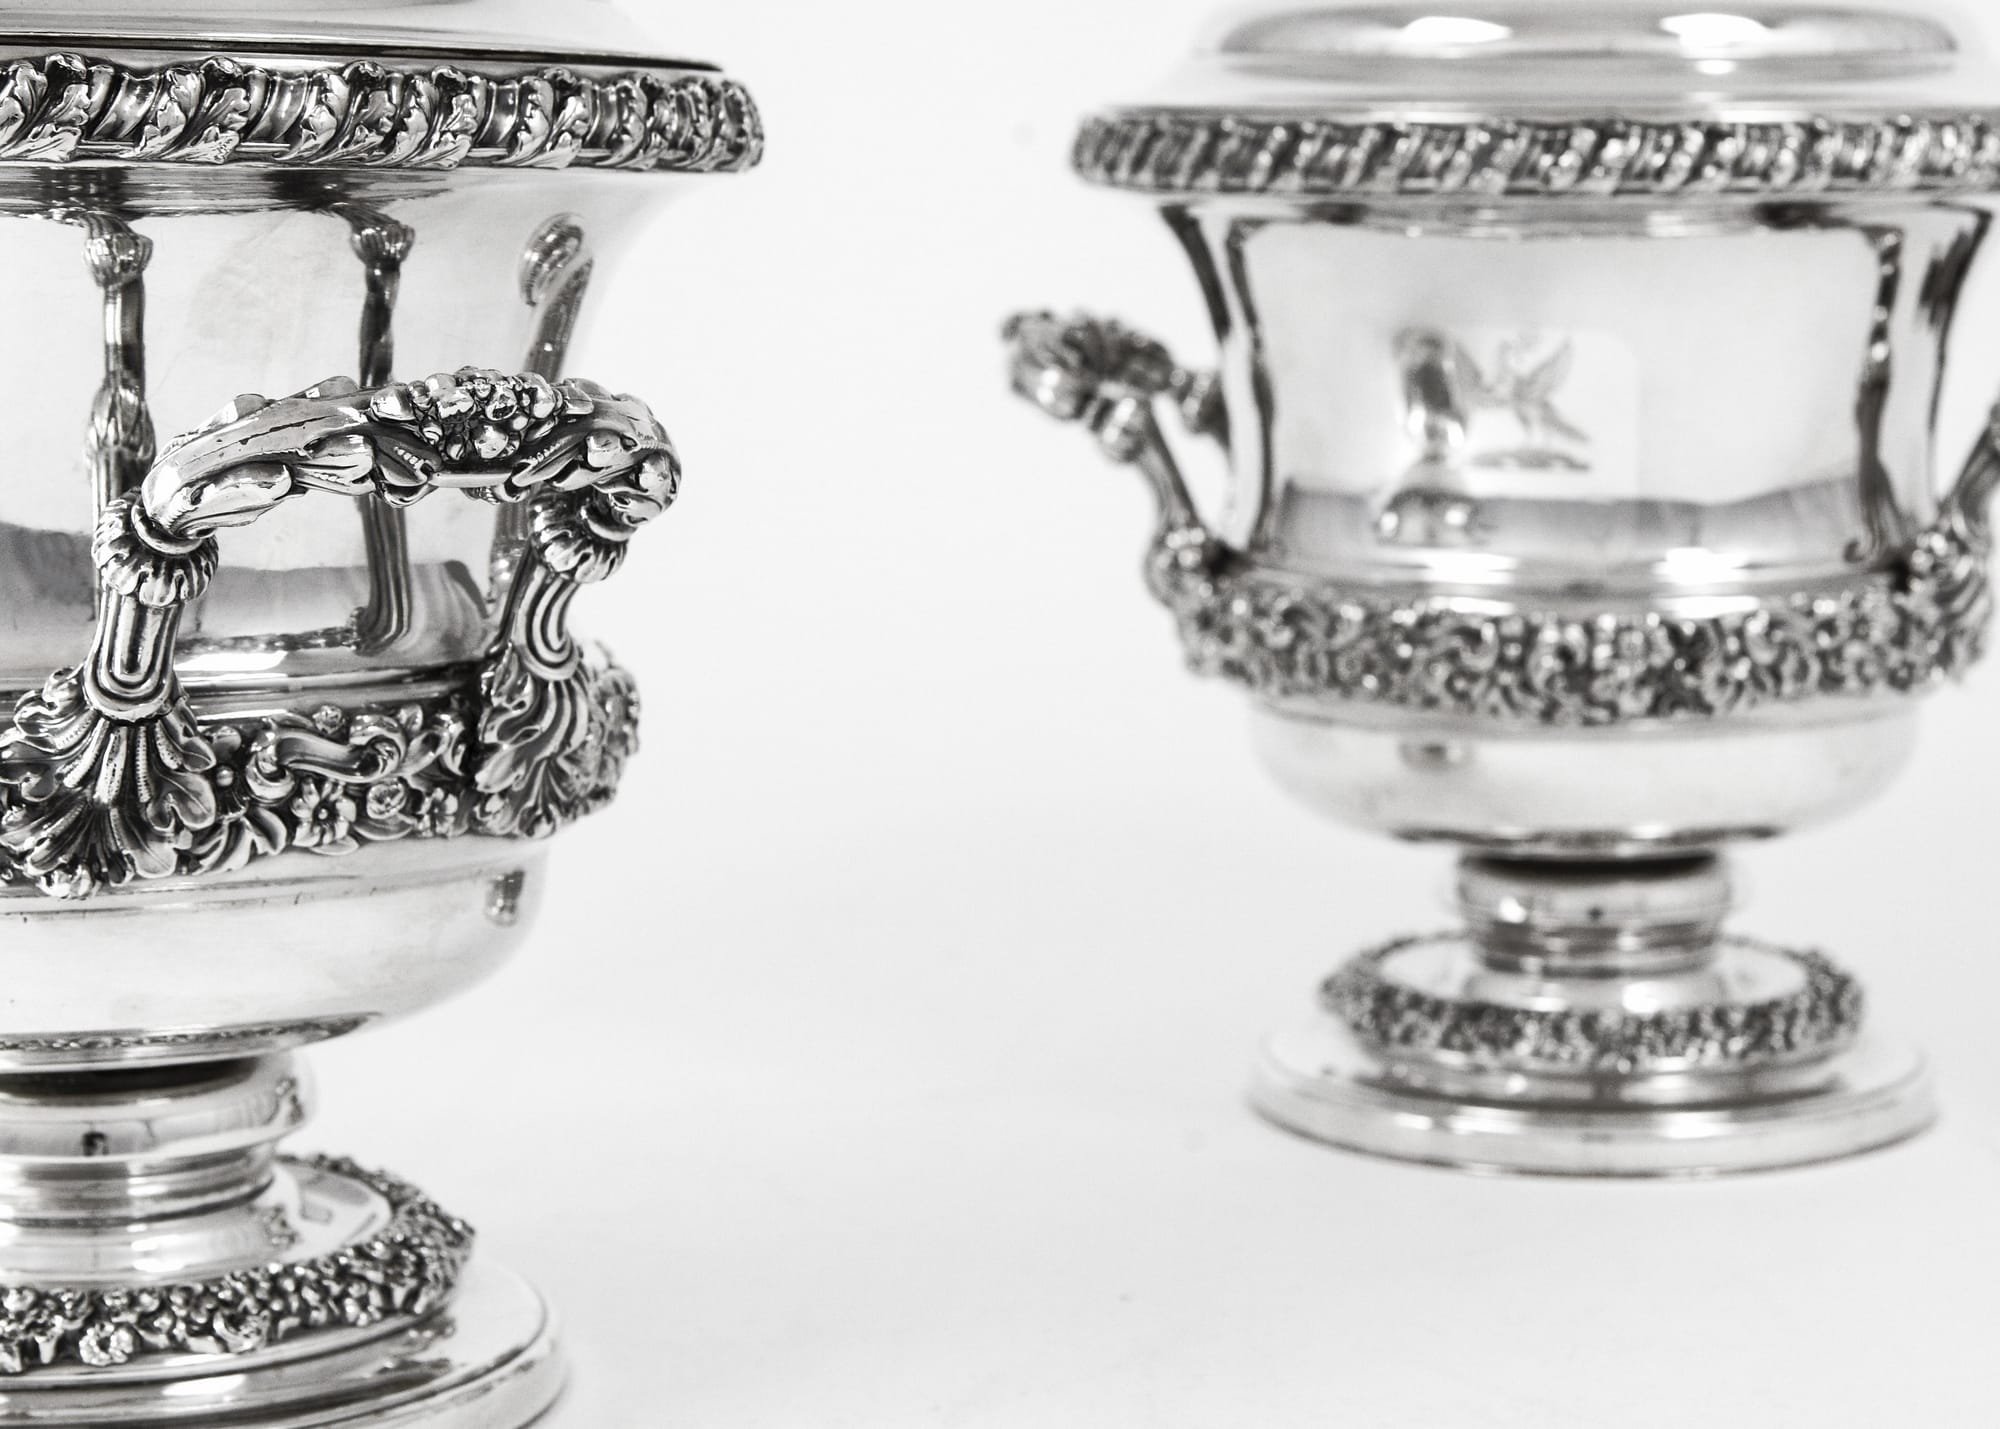 Pair of antique silver wine or champagne coolers